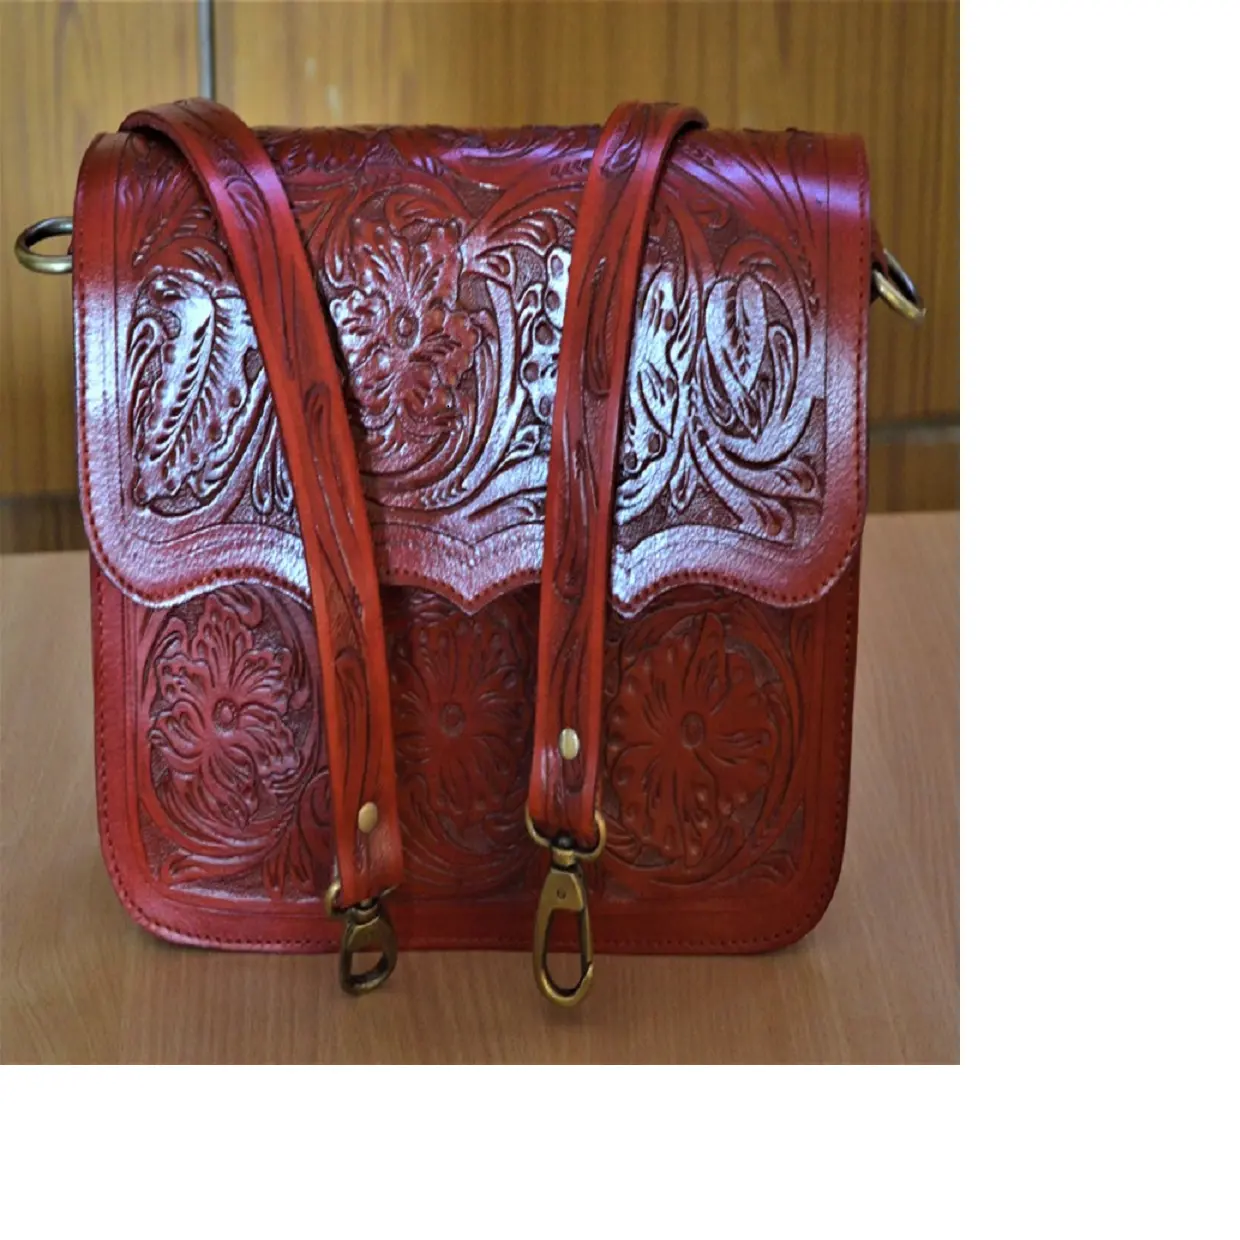 custom made maroon coloured hand carved leather wallets, purses and bags made from real leather with intricately carved patterns